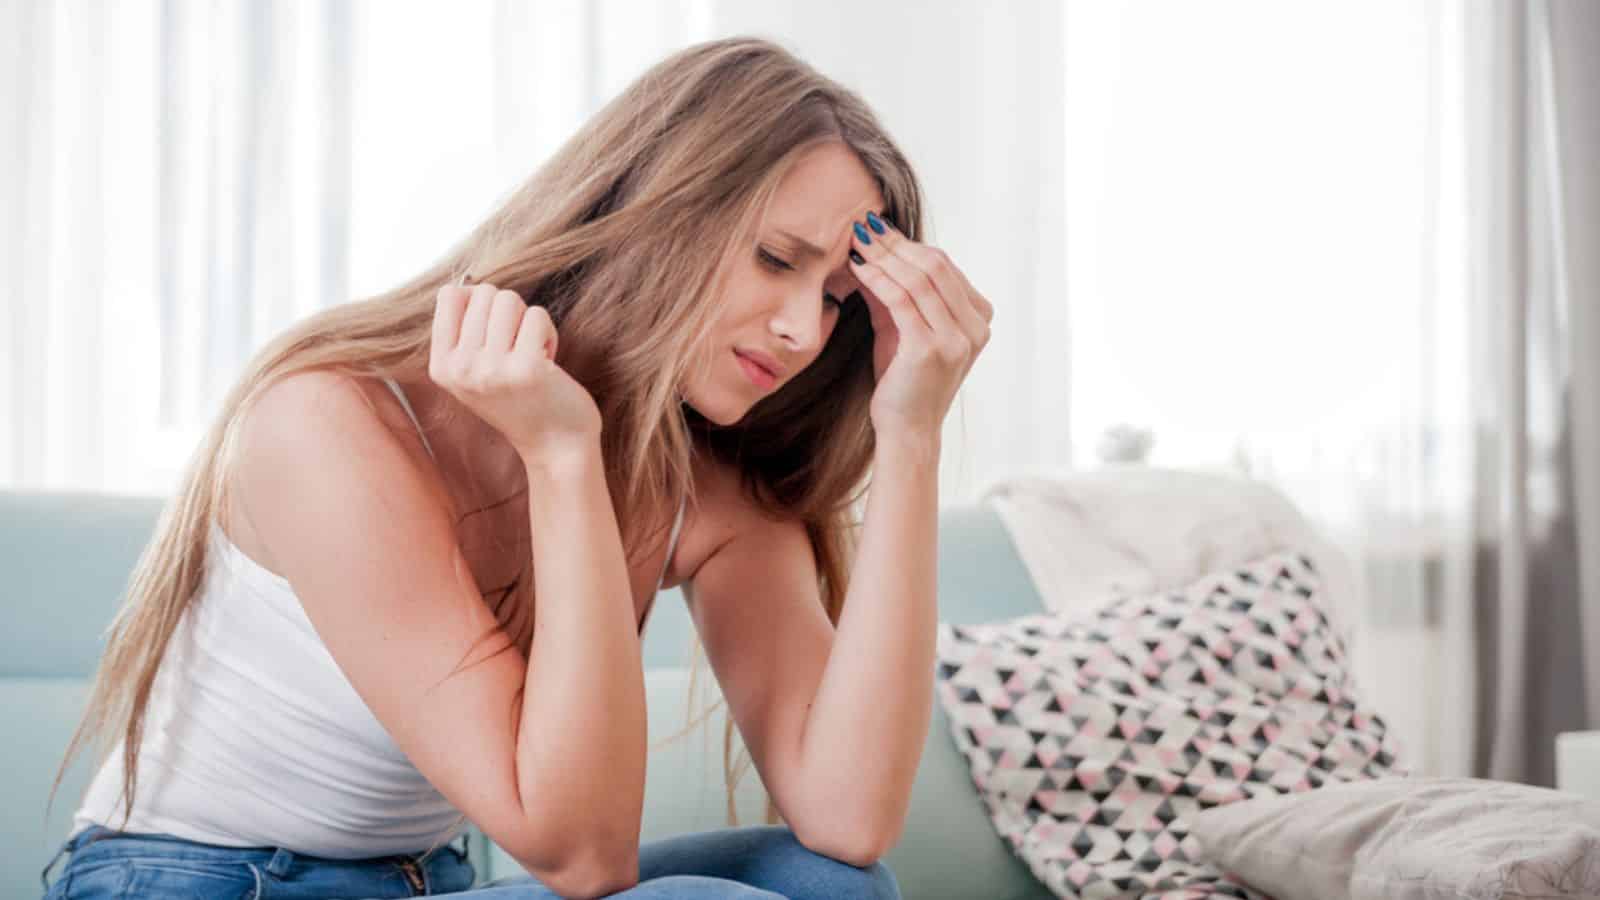 Woman at home suffering from headache, emotions and stress